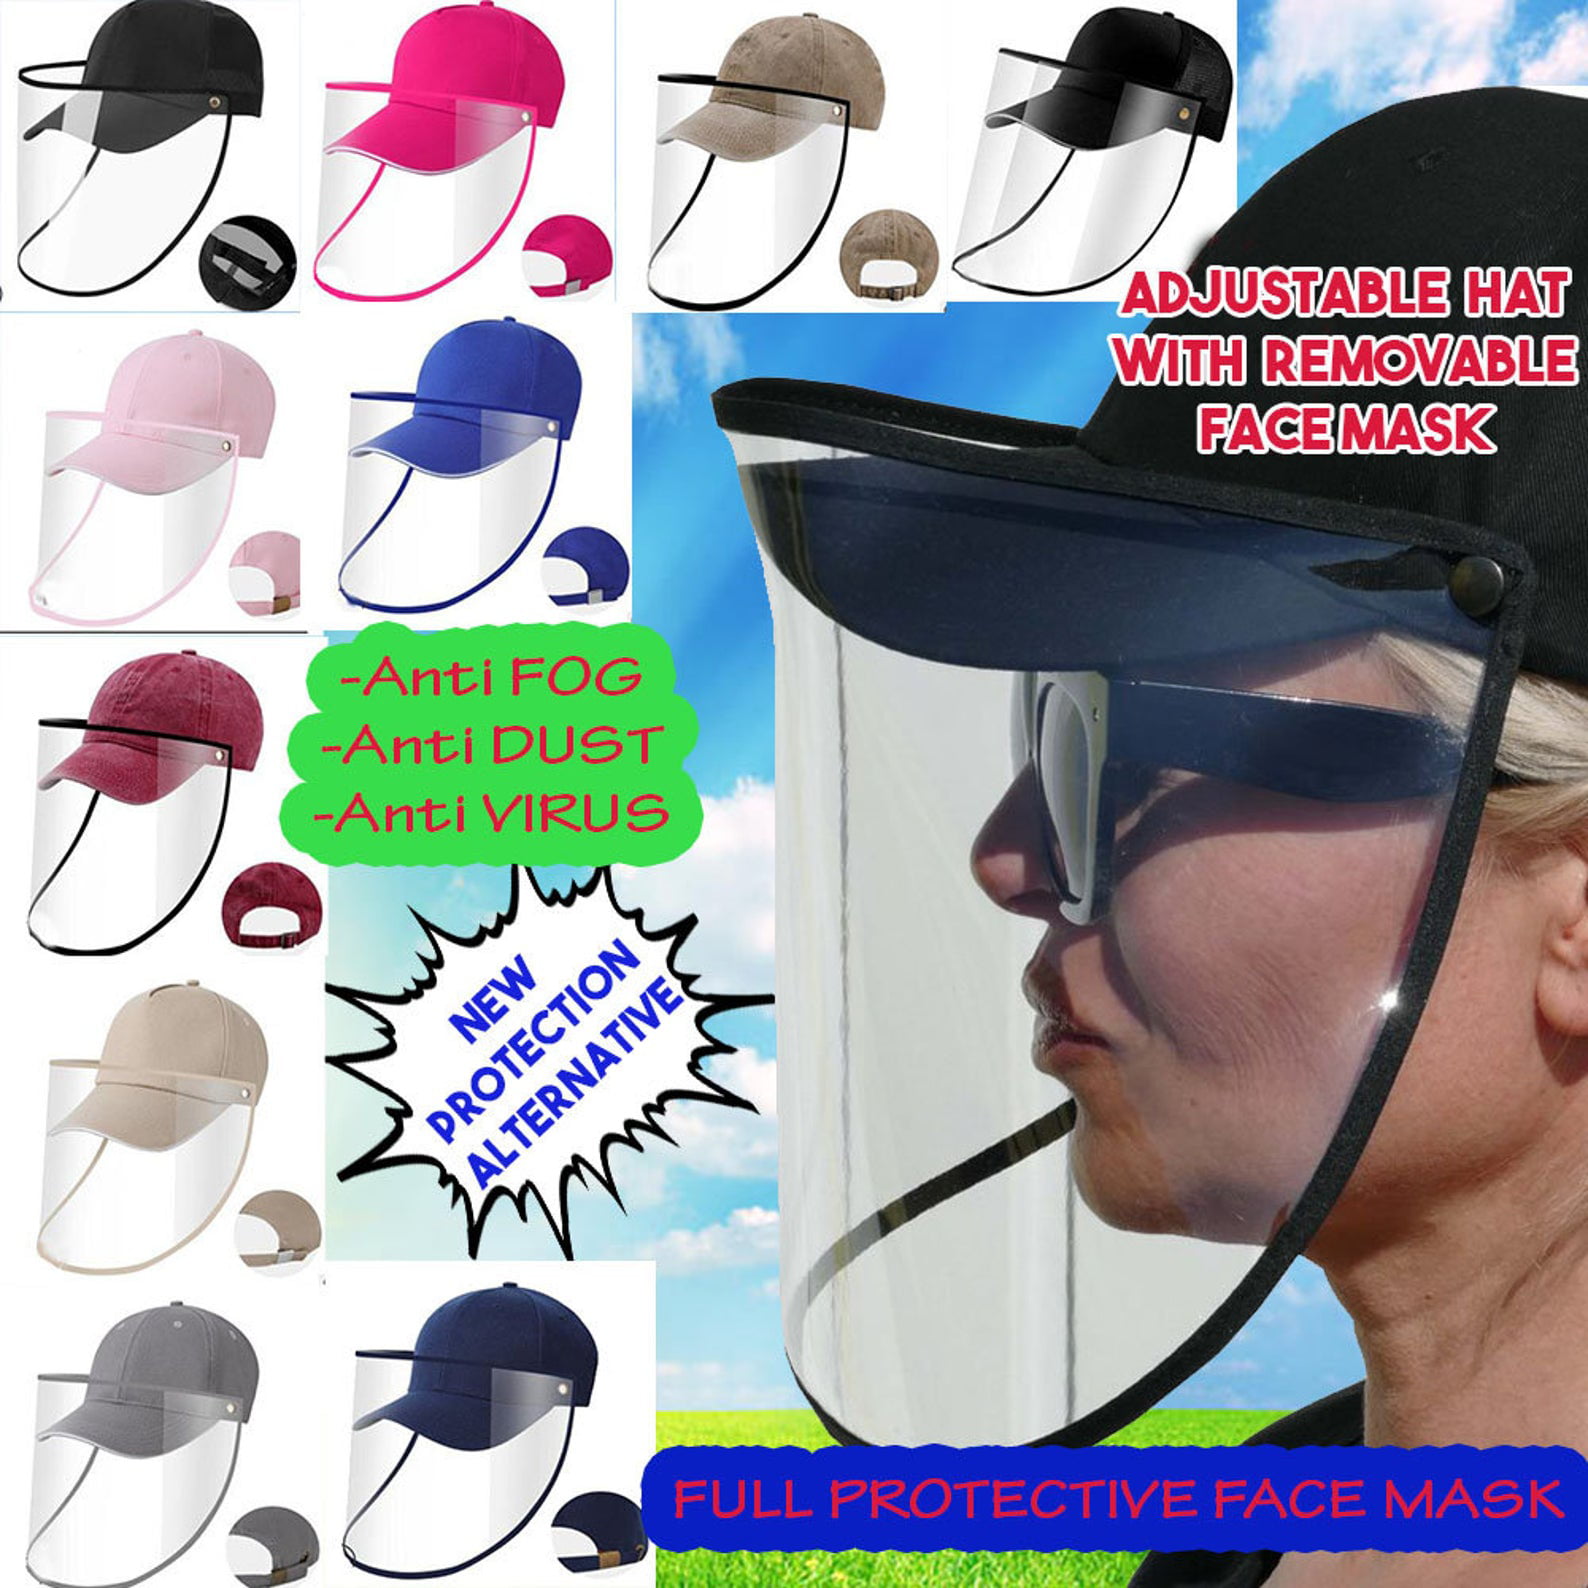 Boys Spider Safety Face Shield Protective Hat Mesh Baseball Cap Anti Spitting US 